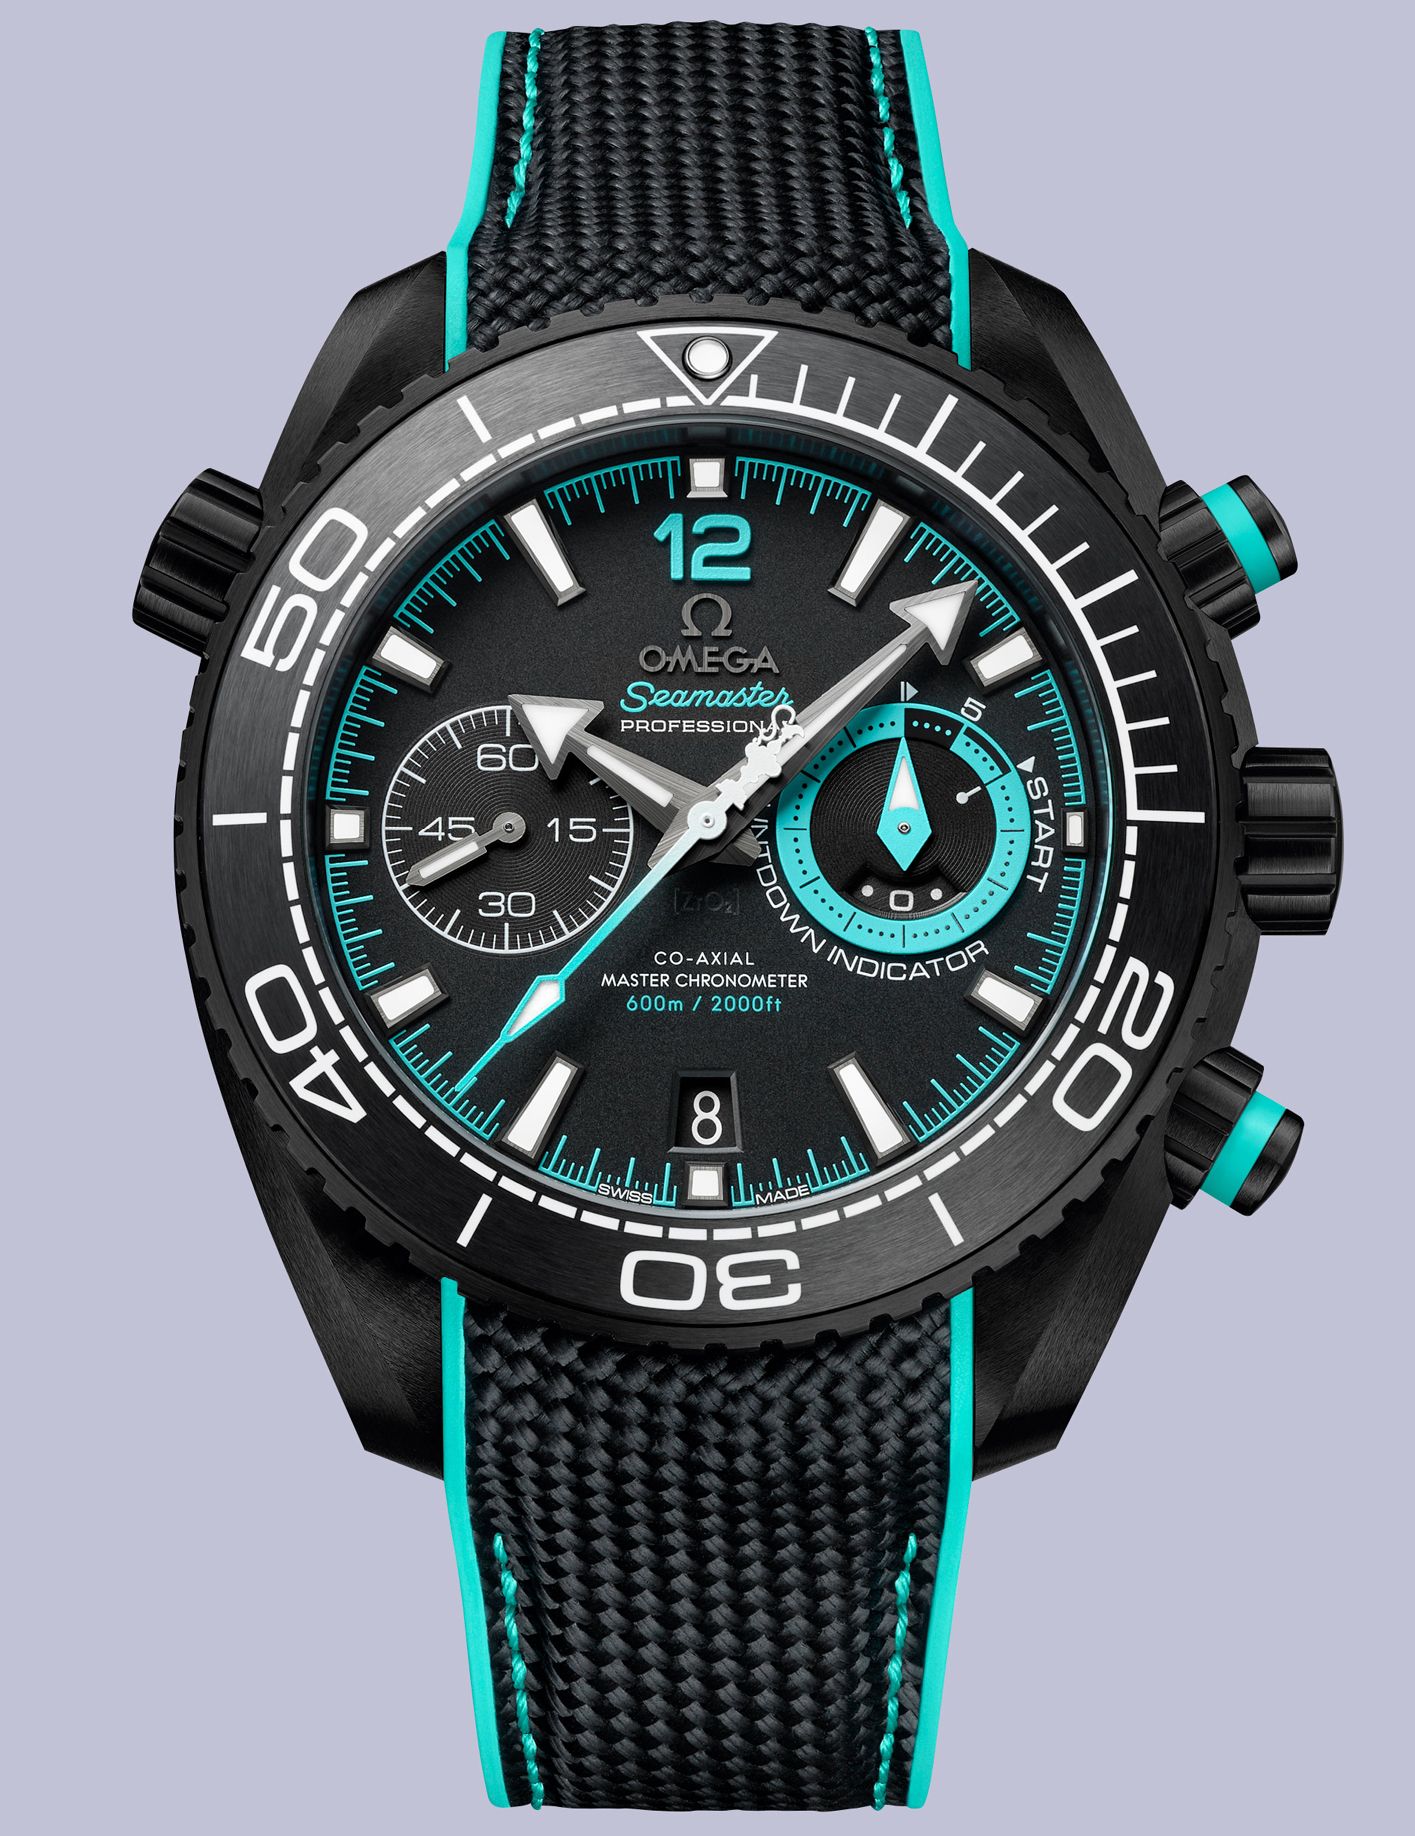 Omega’s Seamaster Planet Ocean special edition